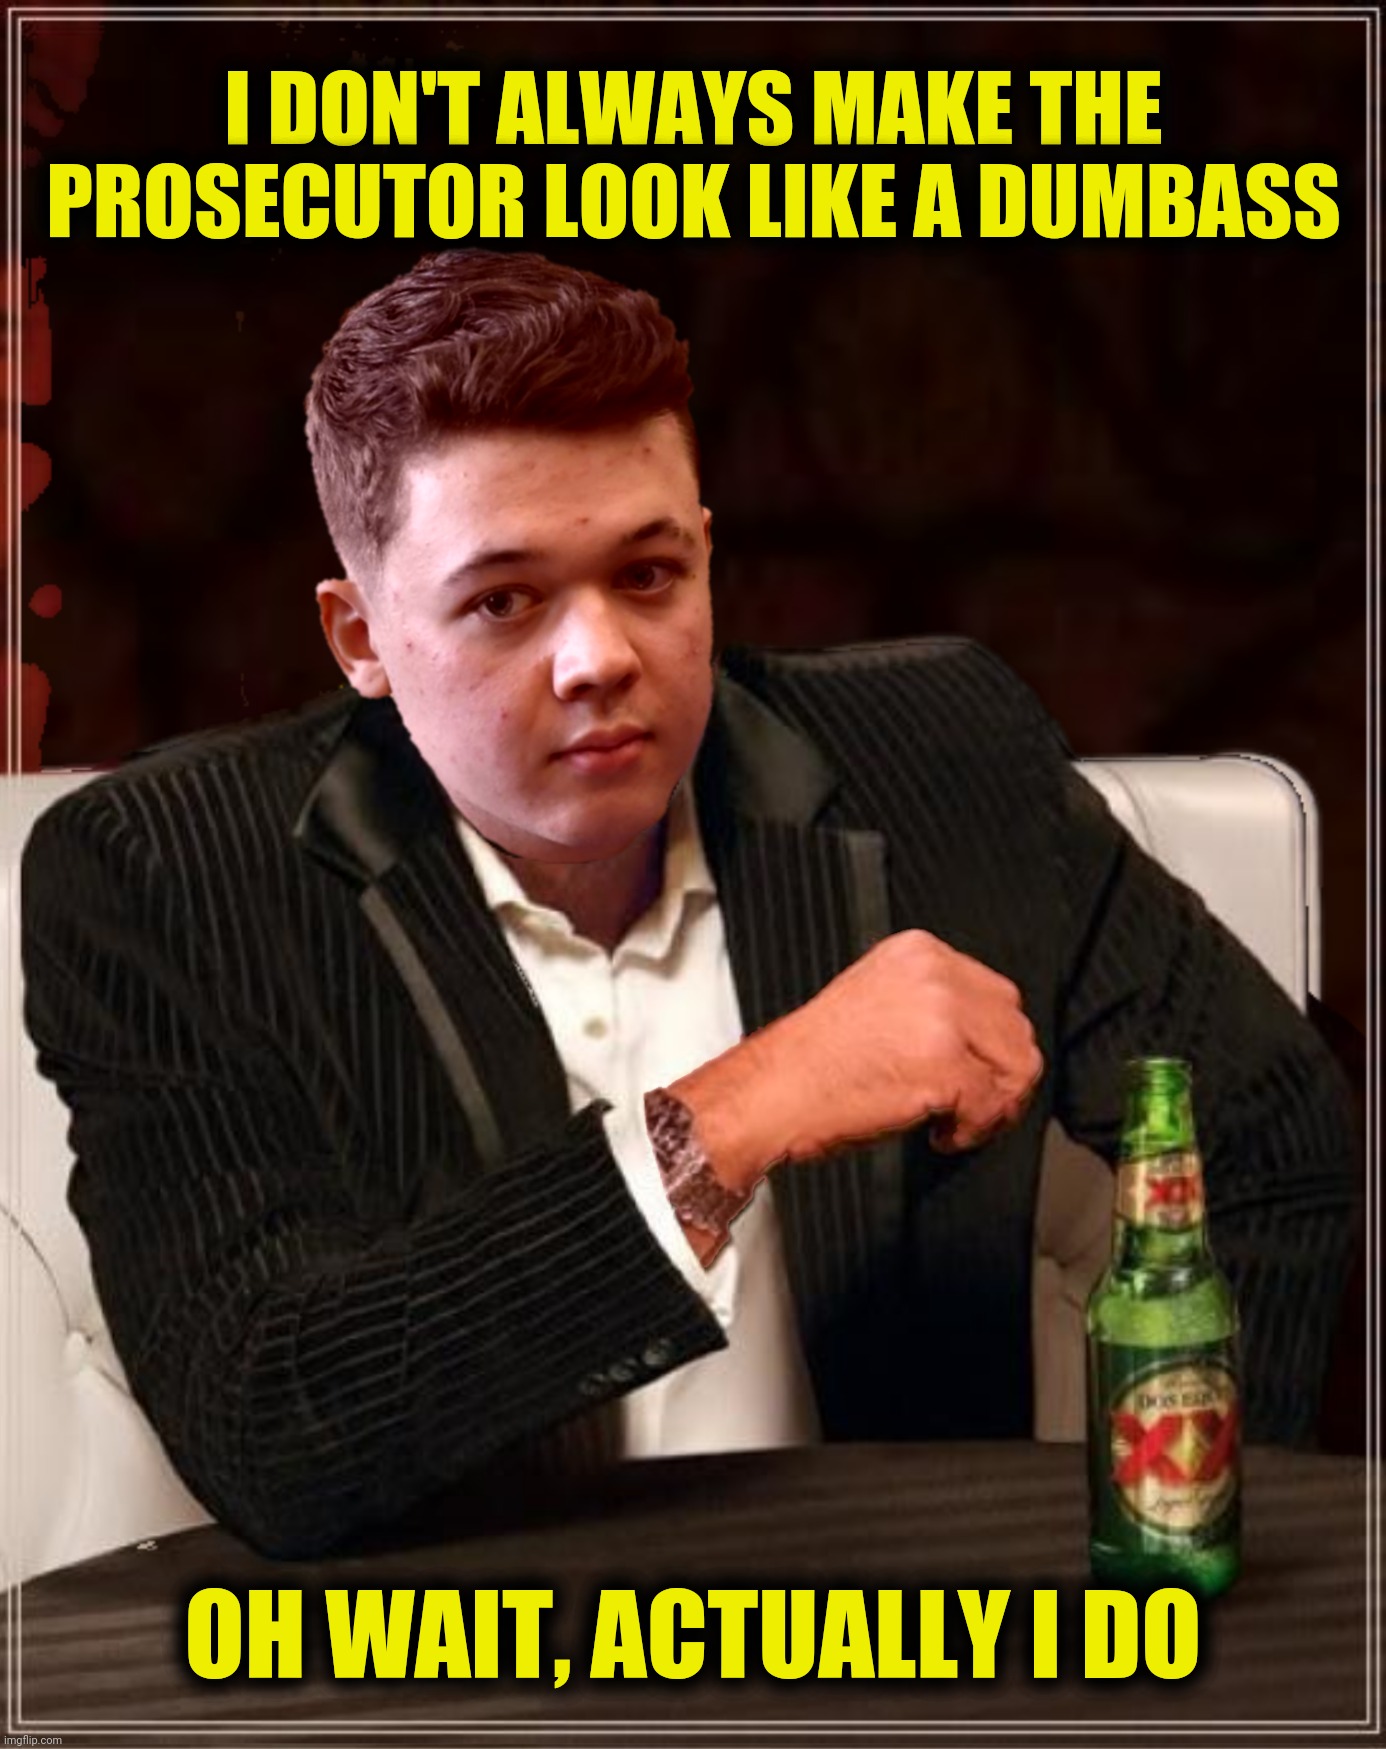 The most innocent man in the world | I DON'T ALWAYS MAKE THE PROSECUTOR LOOK LIKE A DUMBASS; OH WAIT, ACTUALLY I DO | image tagged in bad photoshop,kyle rittenhouse,the most interesting man in the world,prosecutor | made w/ Imgflip meme maker